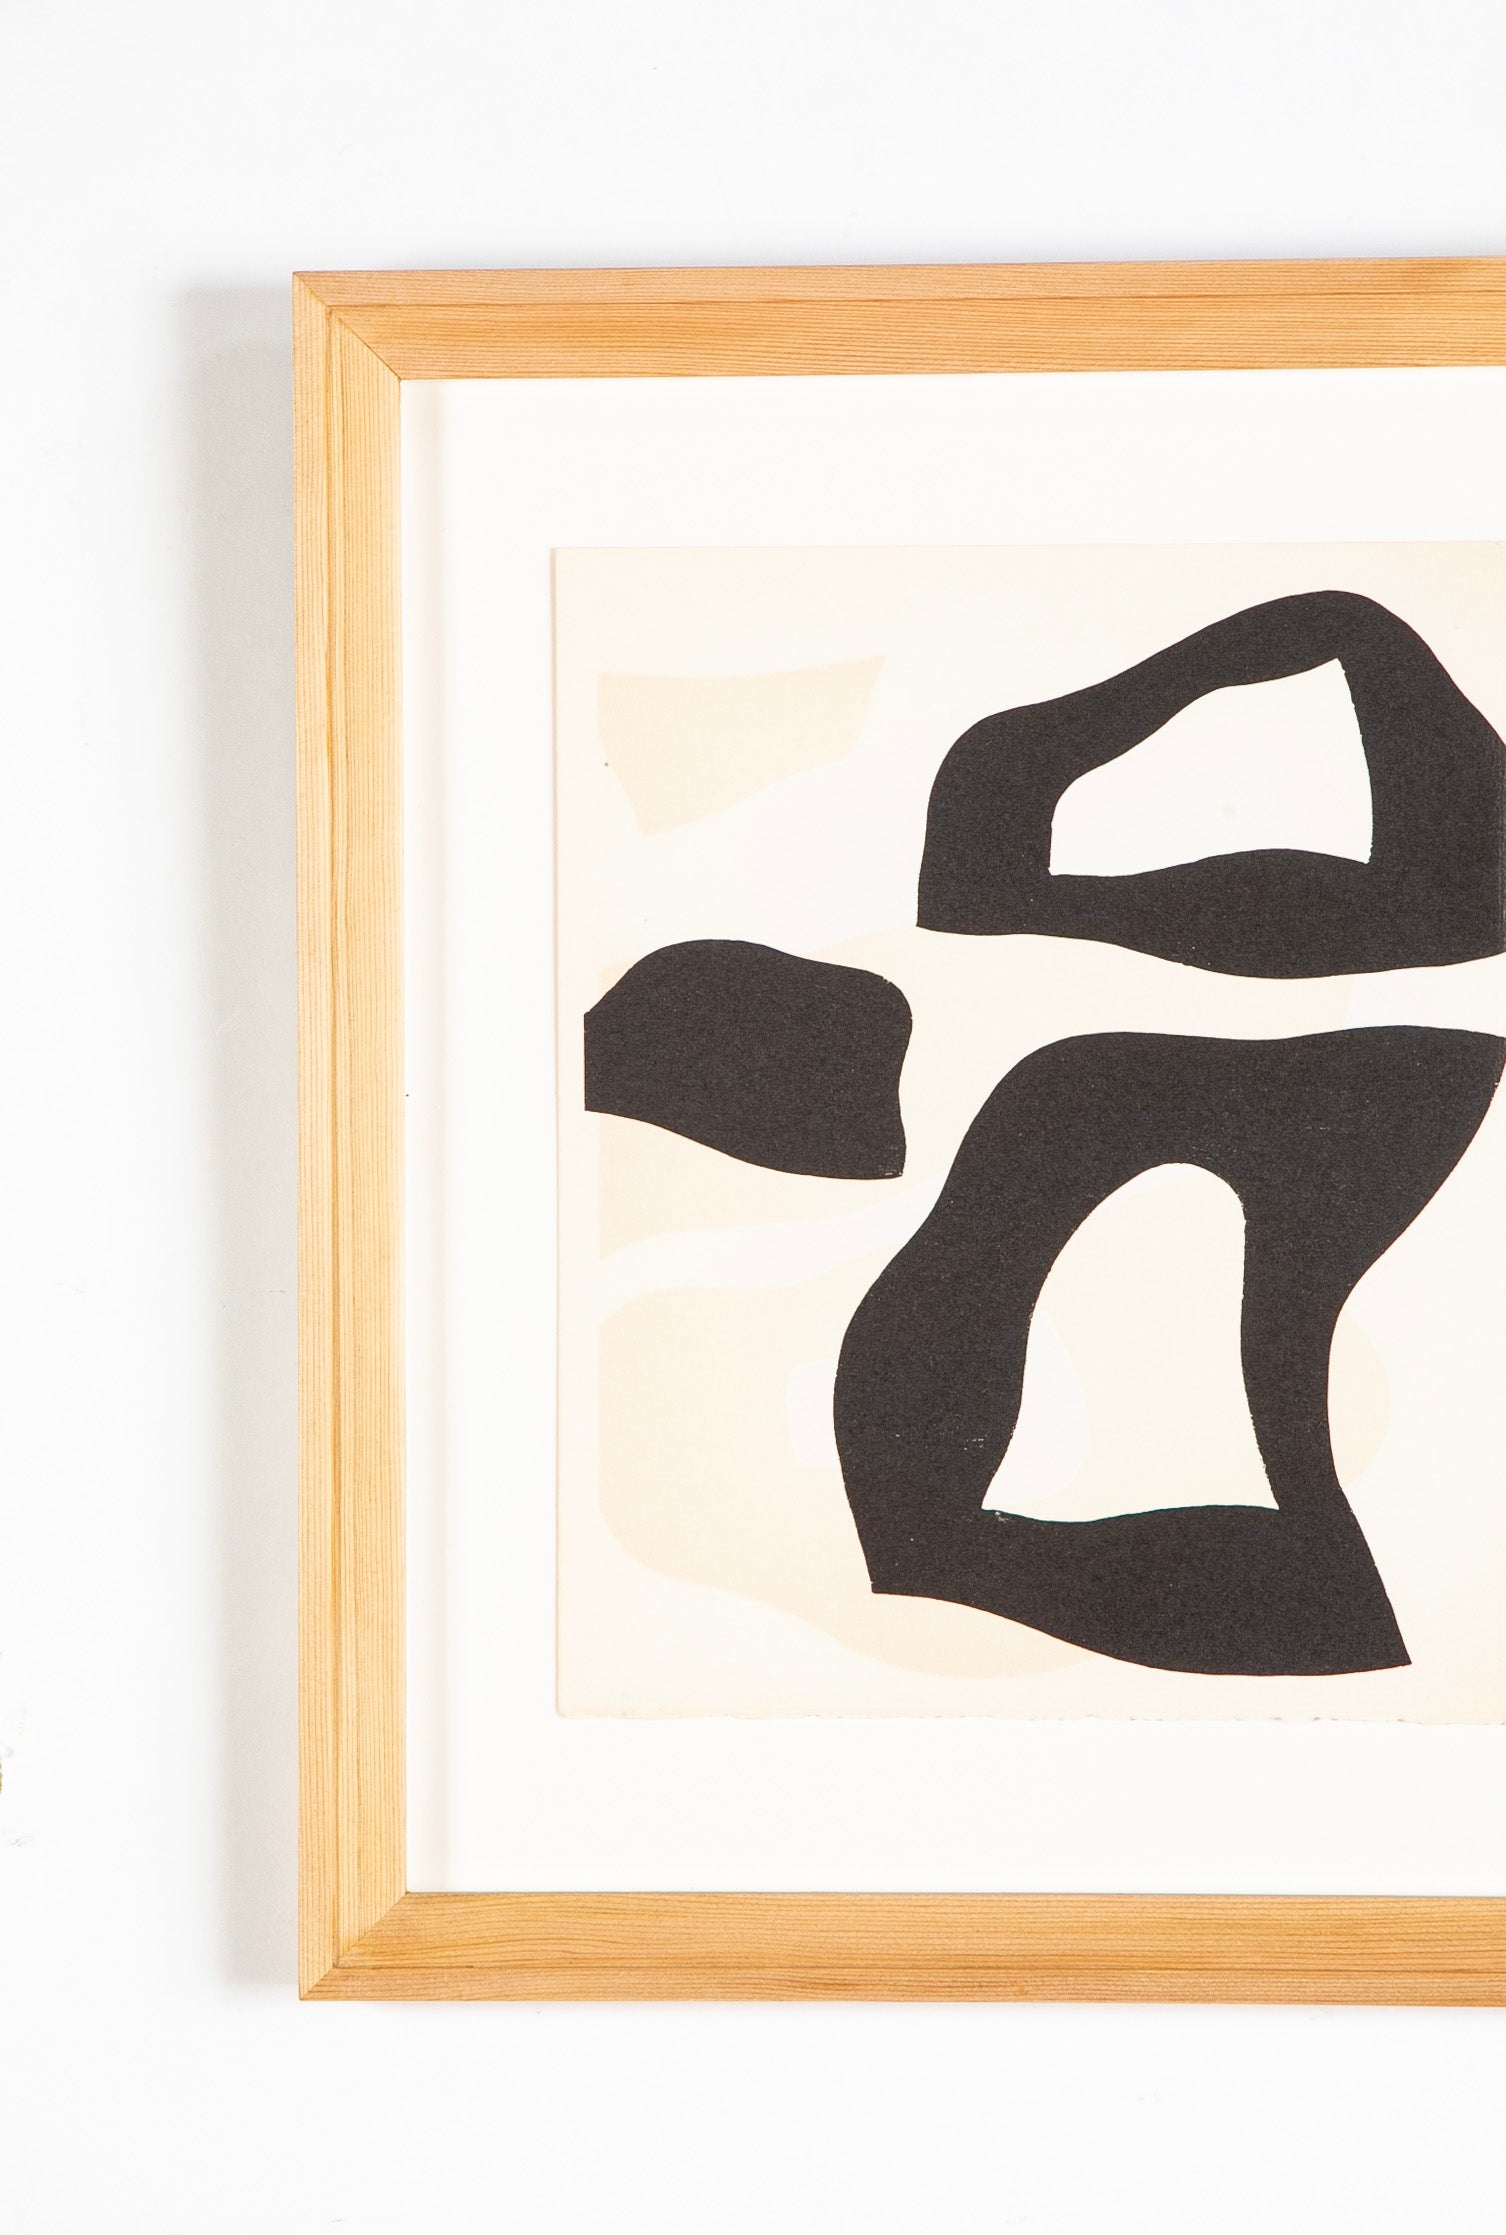 Three Woodcuts on Arches from "Dreams & Projects" by Jean Hans Arp